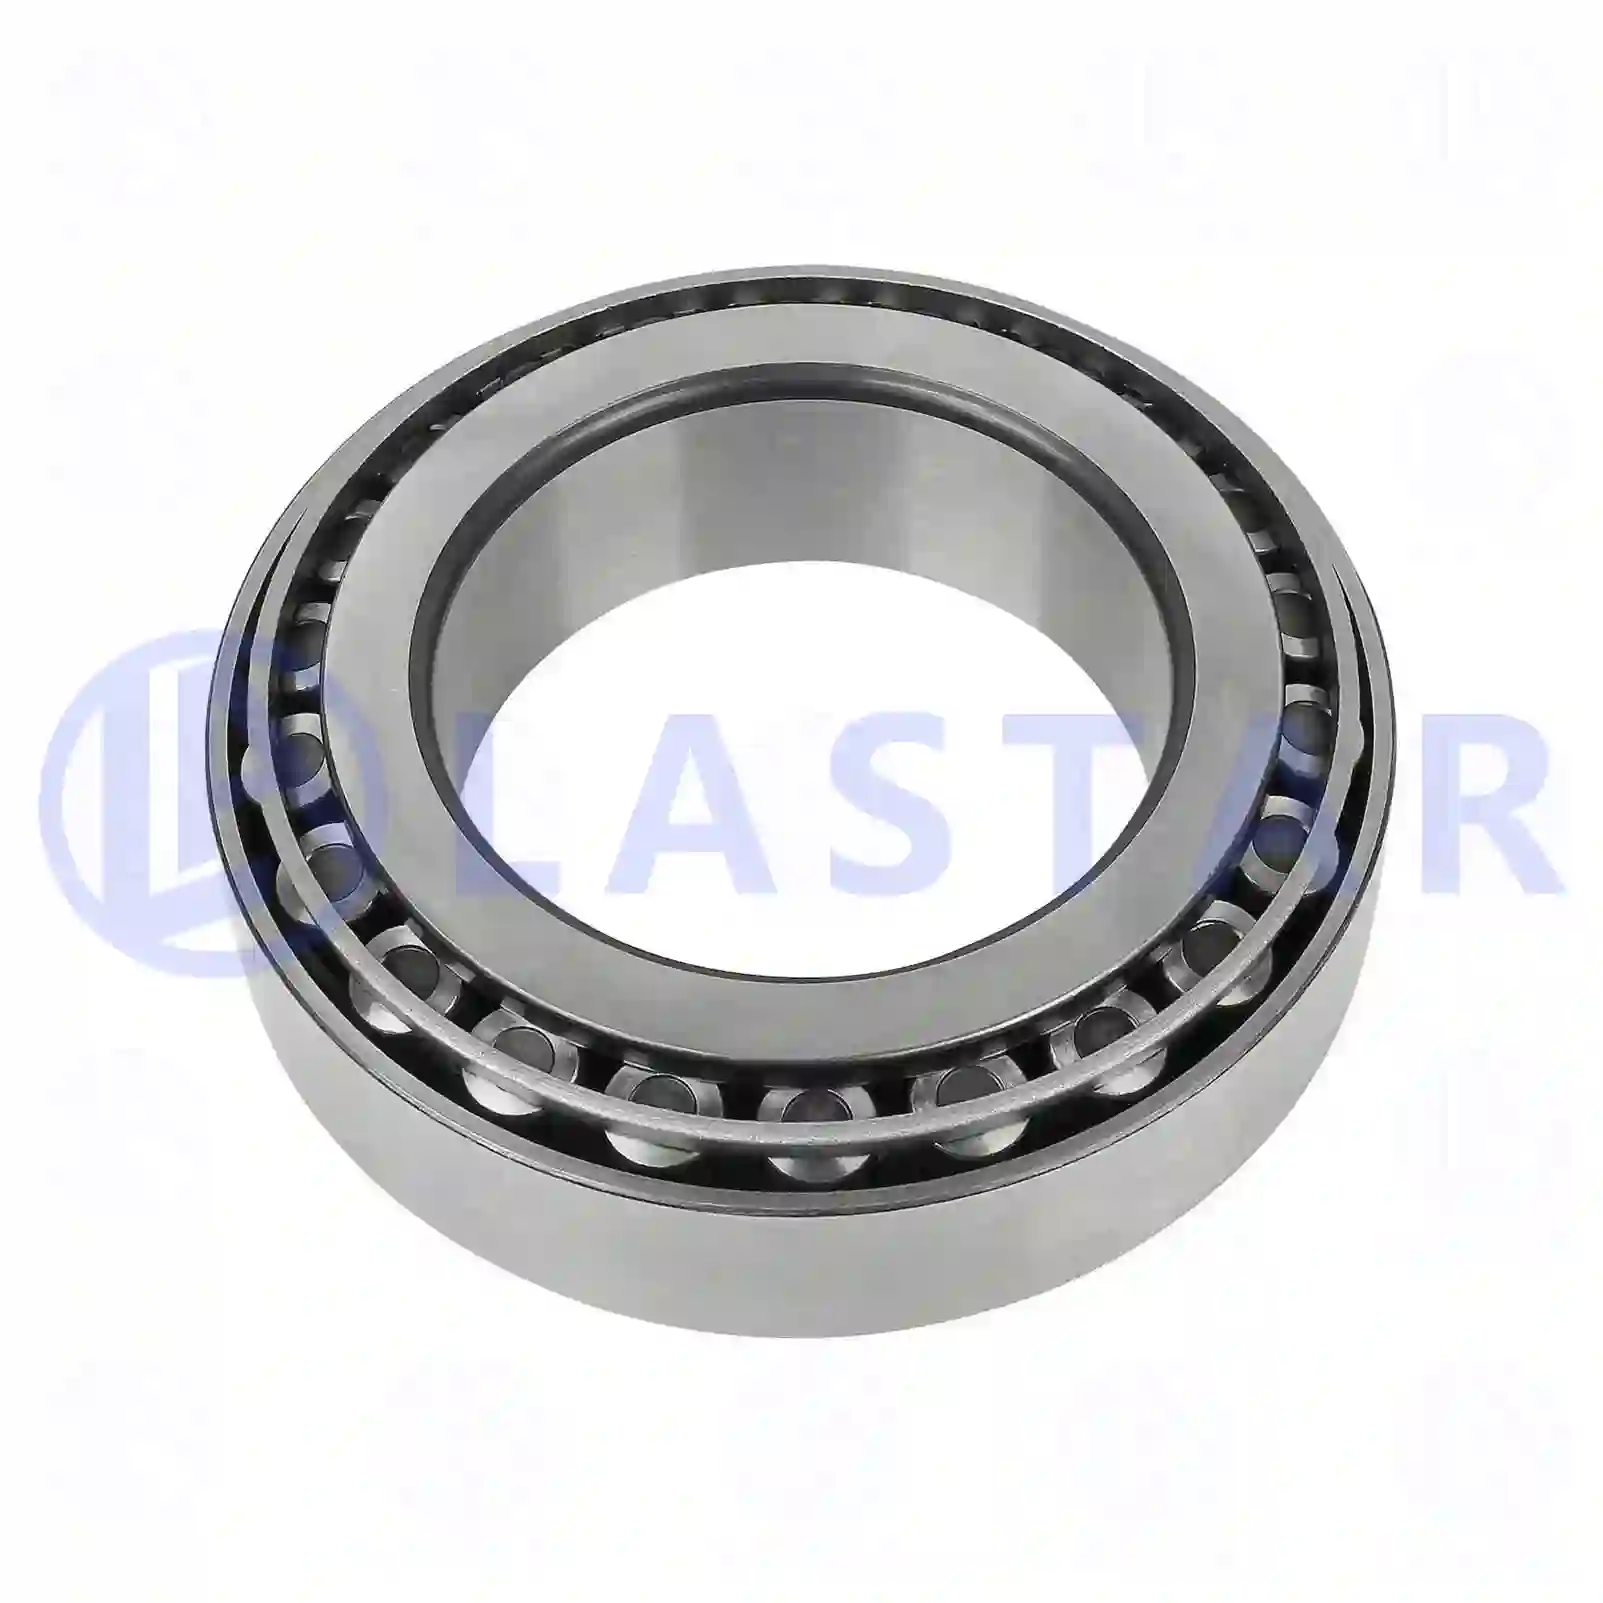 Bearings Tapered roller bearing, la no: 77725399 ,  oem no:FL11033, 5000682544, 0082261, 1309568, 1728135 Lastar Spare Part | Truck Spare Parts, Auotomotive Spare Parts